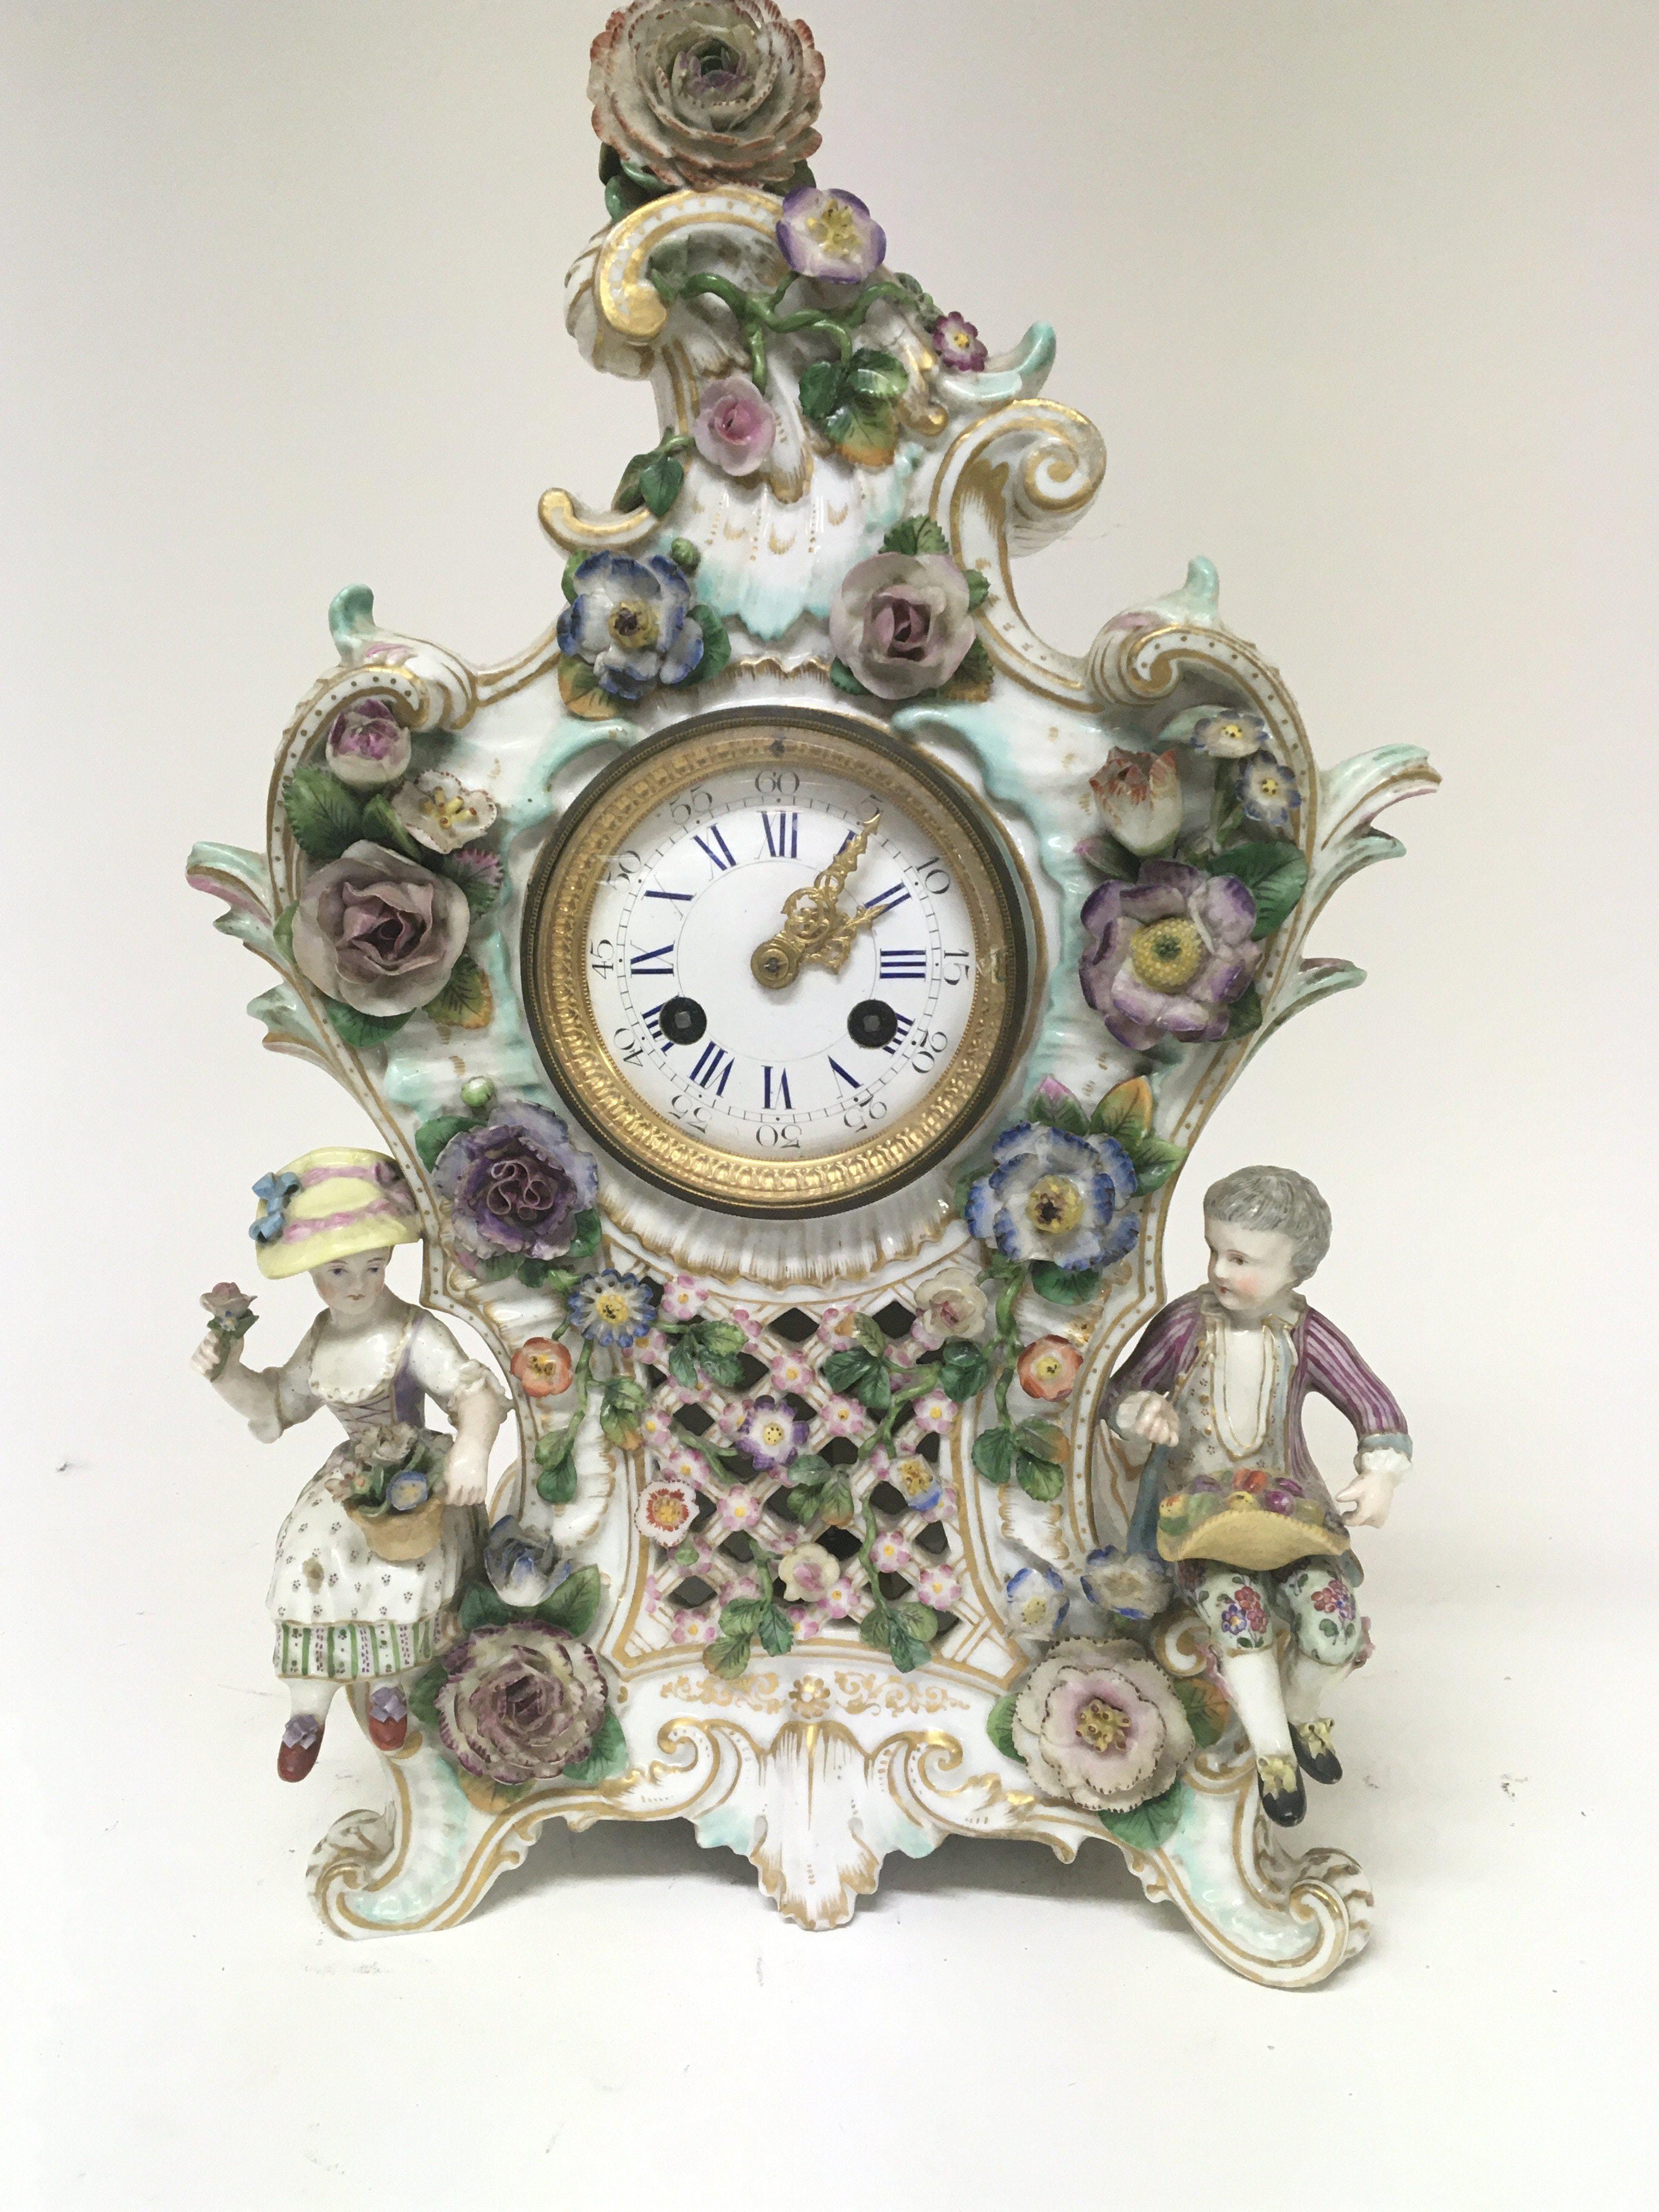 A quality late 19th century German porcelain clock